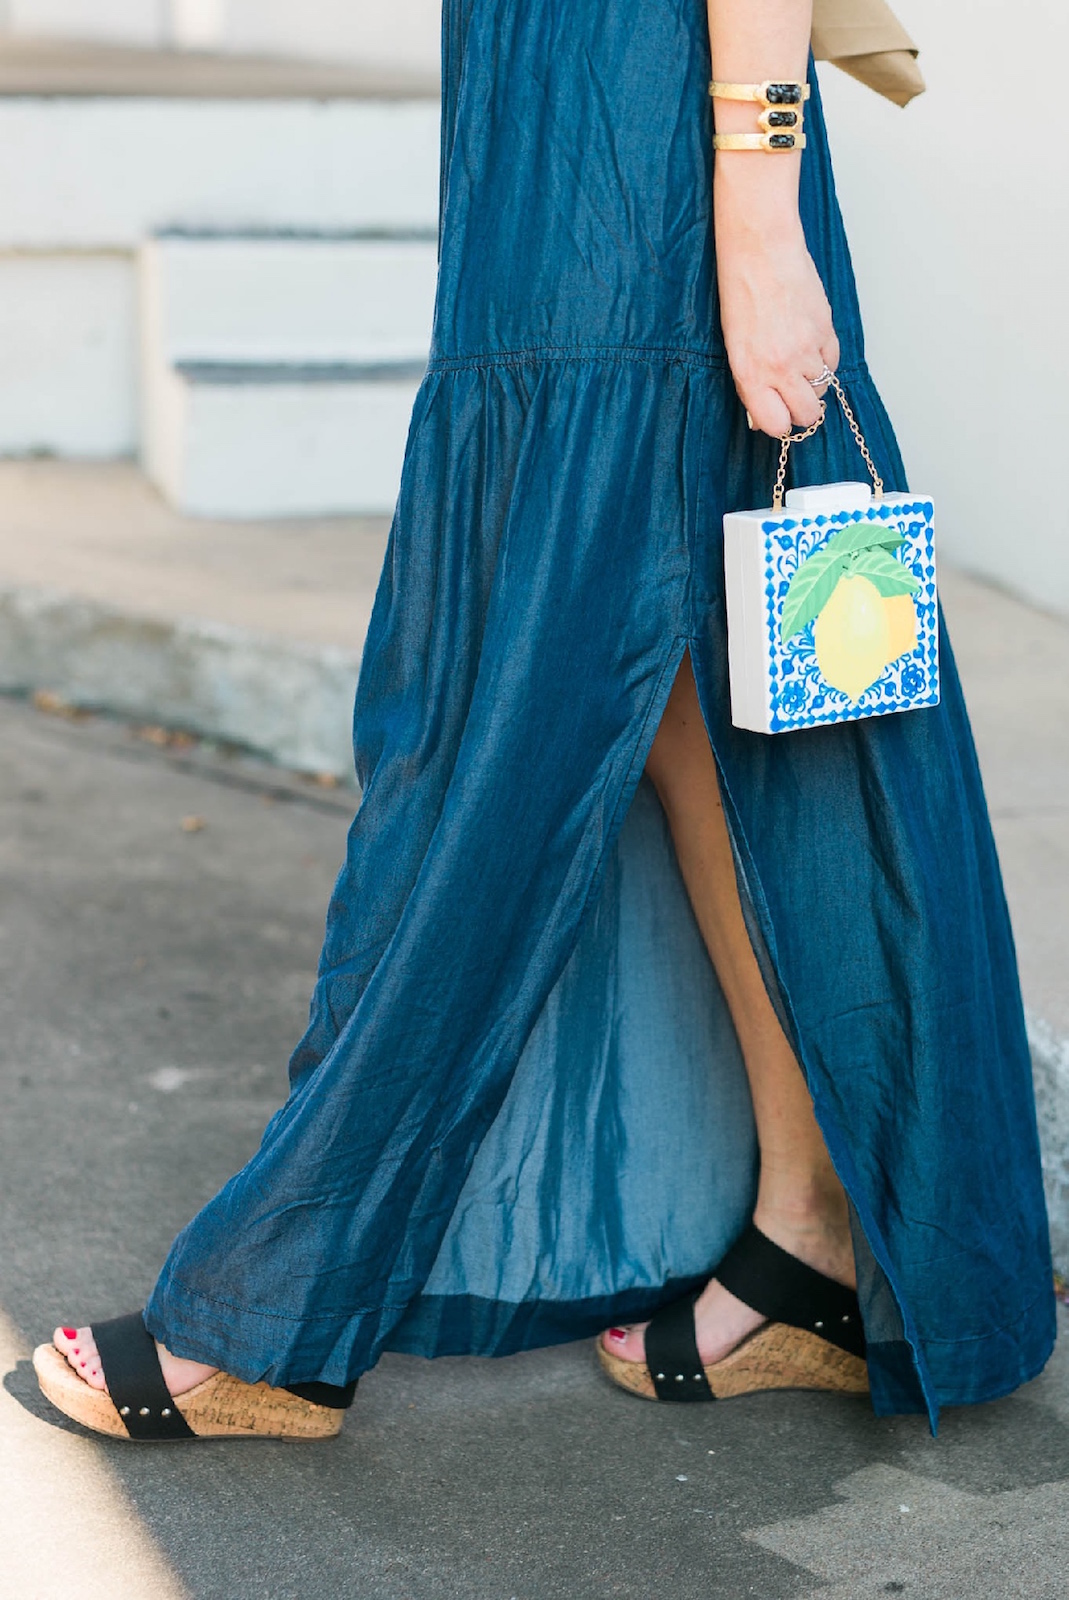 acrylic blue and white lemon clutch, sole society black and cork wedges, macy's chambray maxi dresses, dark blue maxi dress